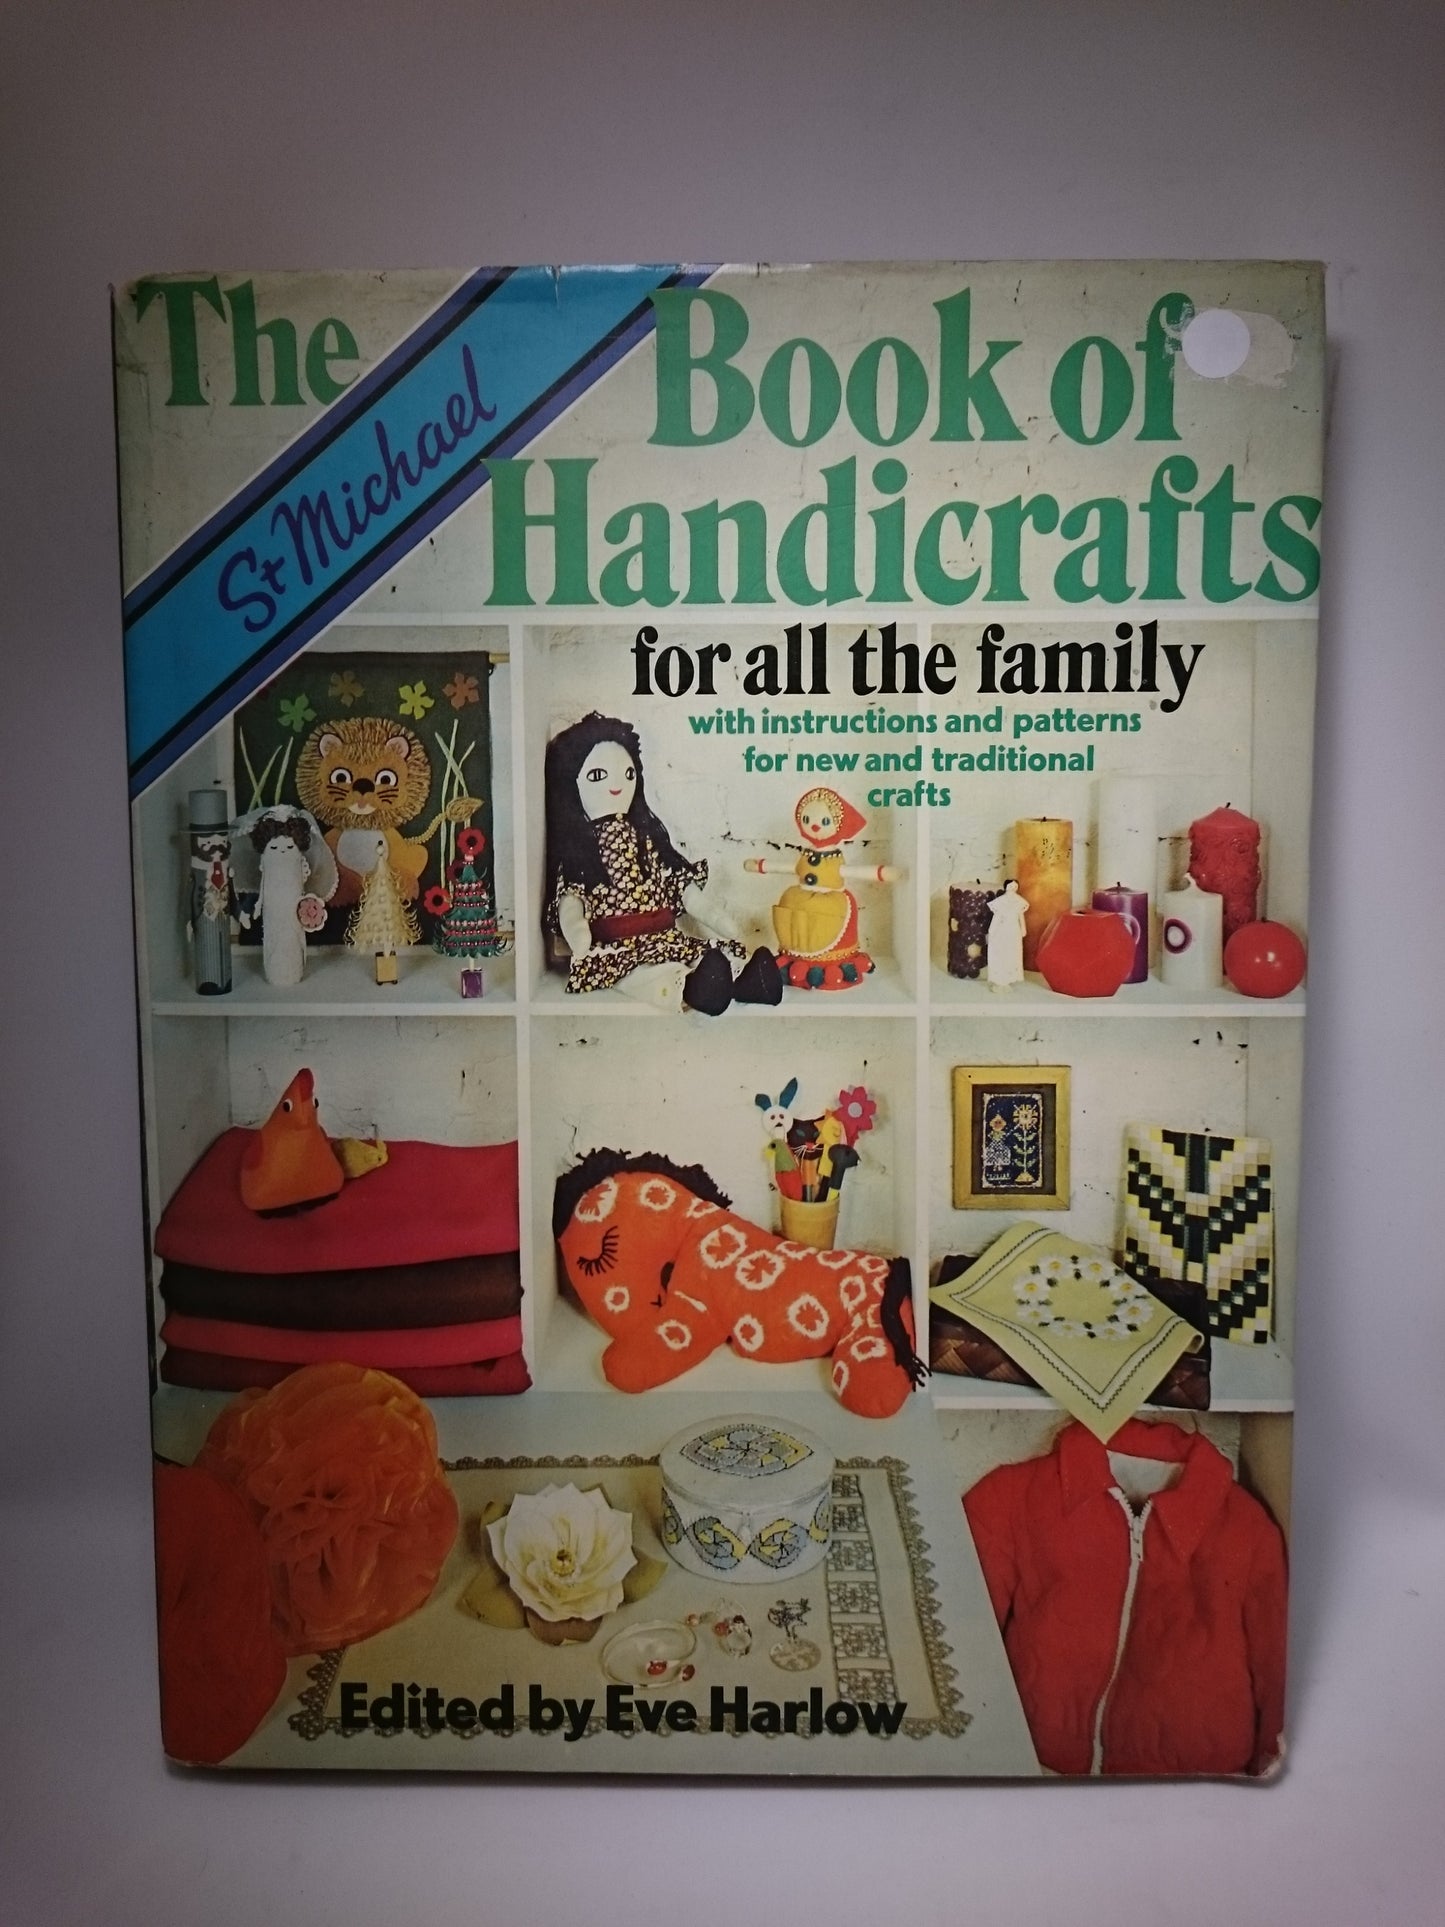 The book of handicrafts for all the family